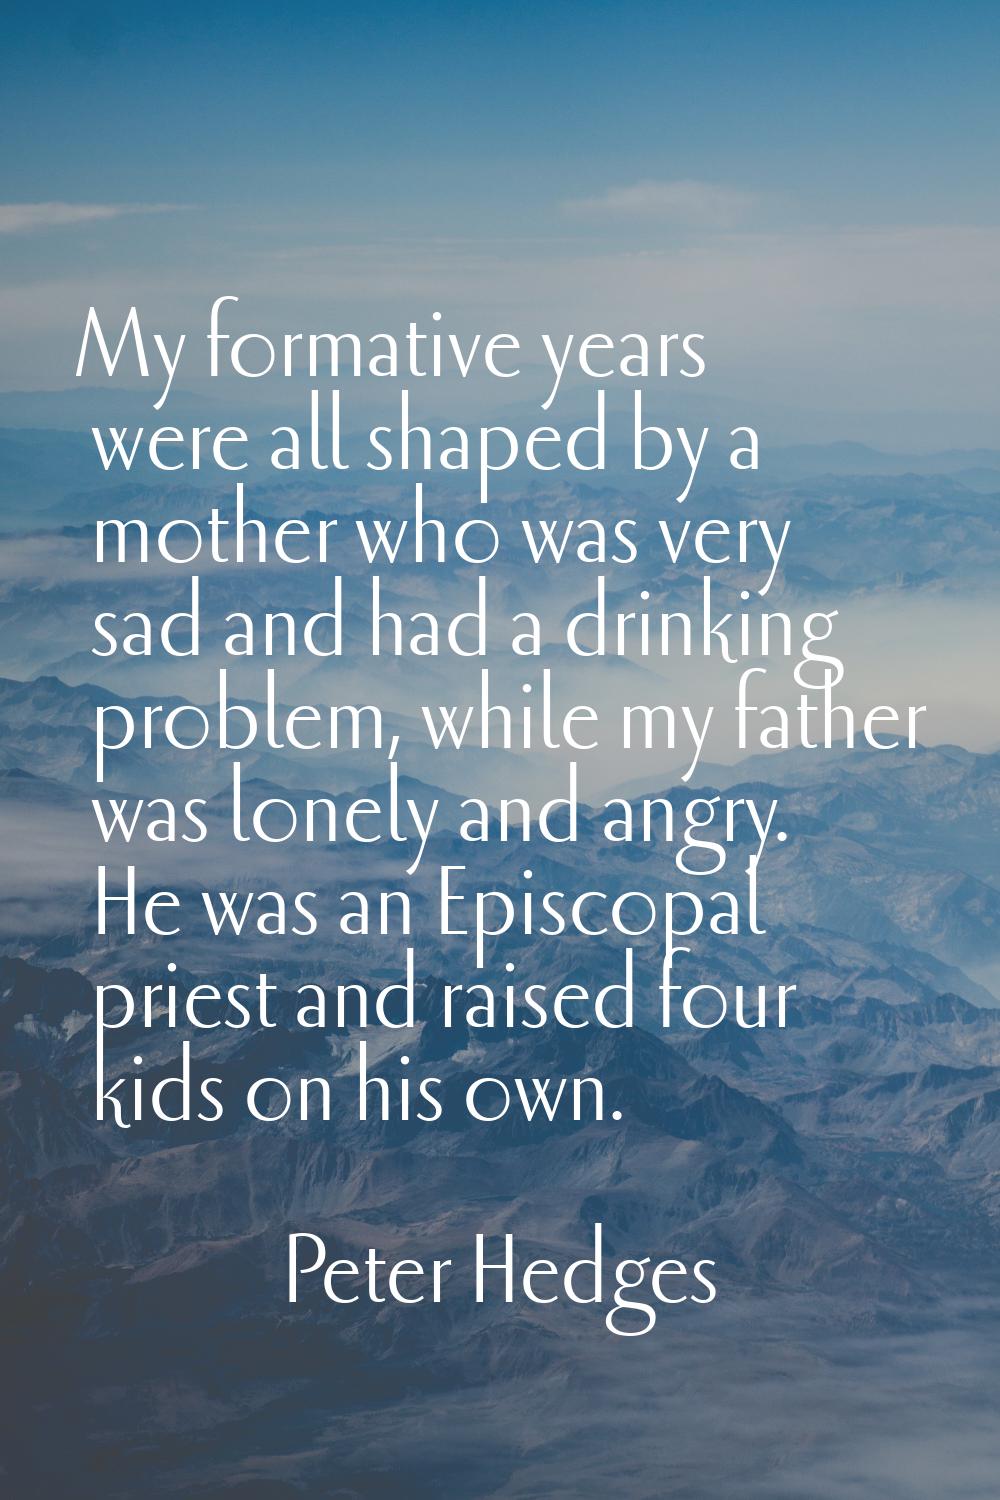 My formative years were all shaped by a mother who was very sad and had a drinking problem, while m